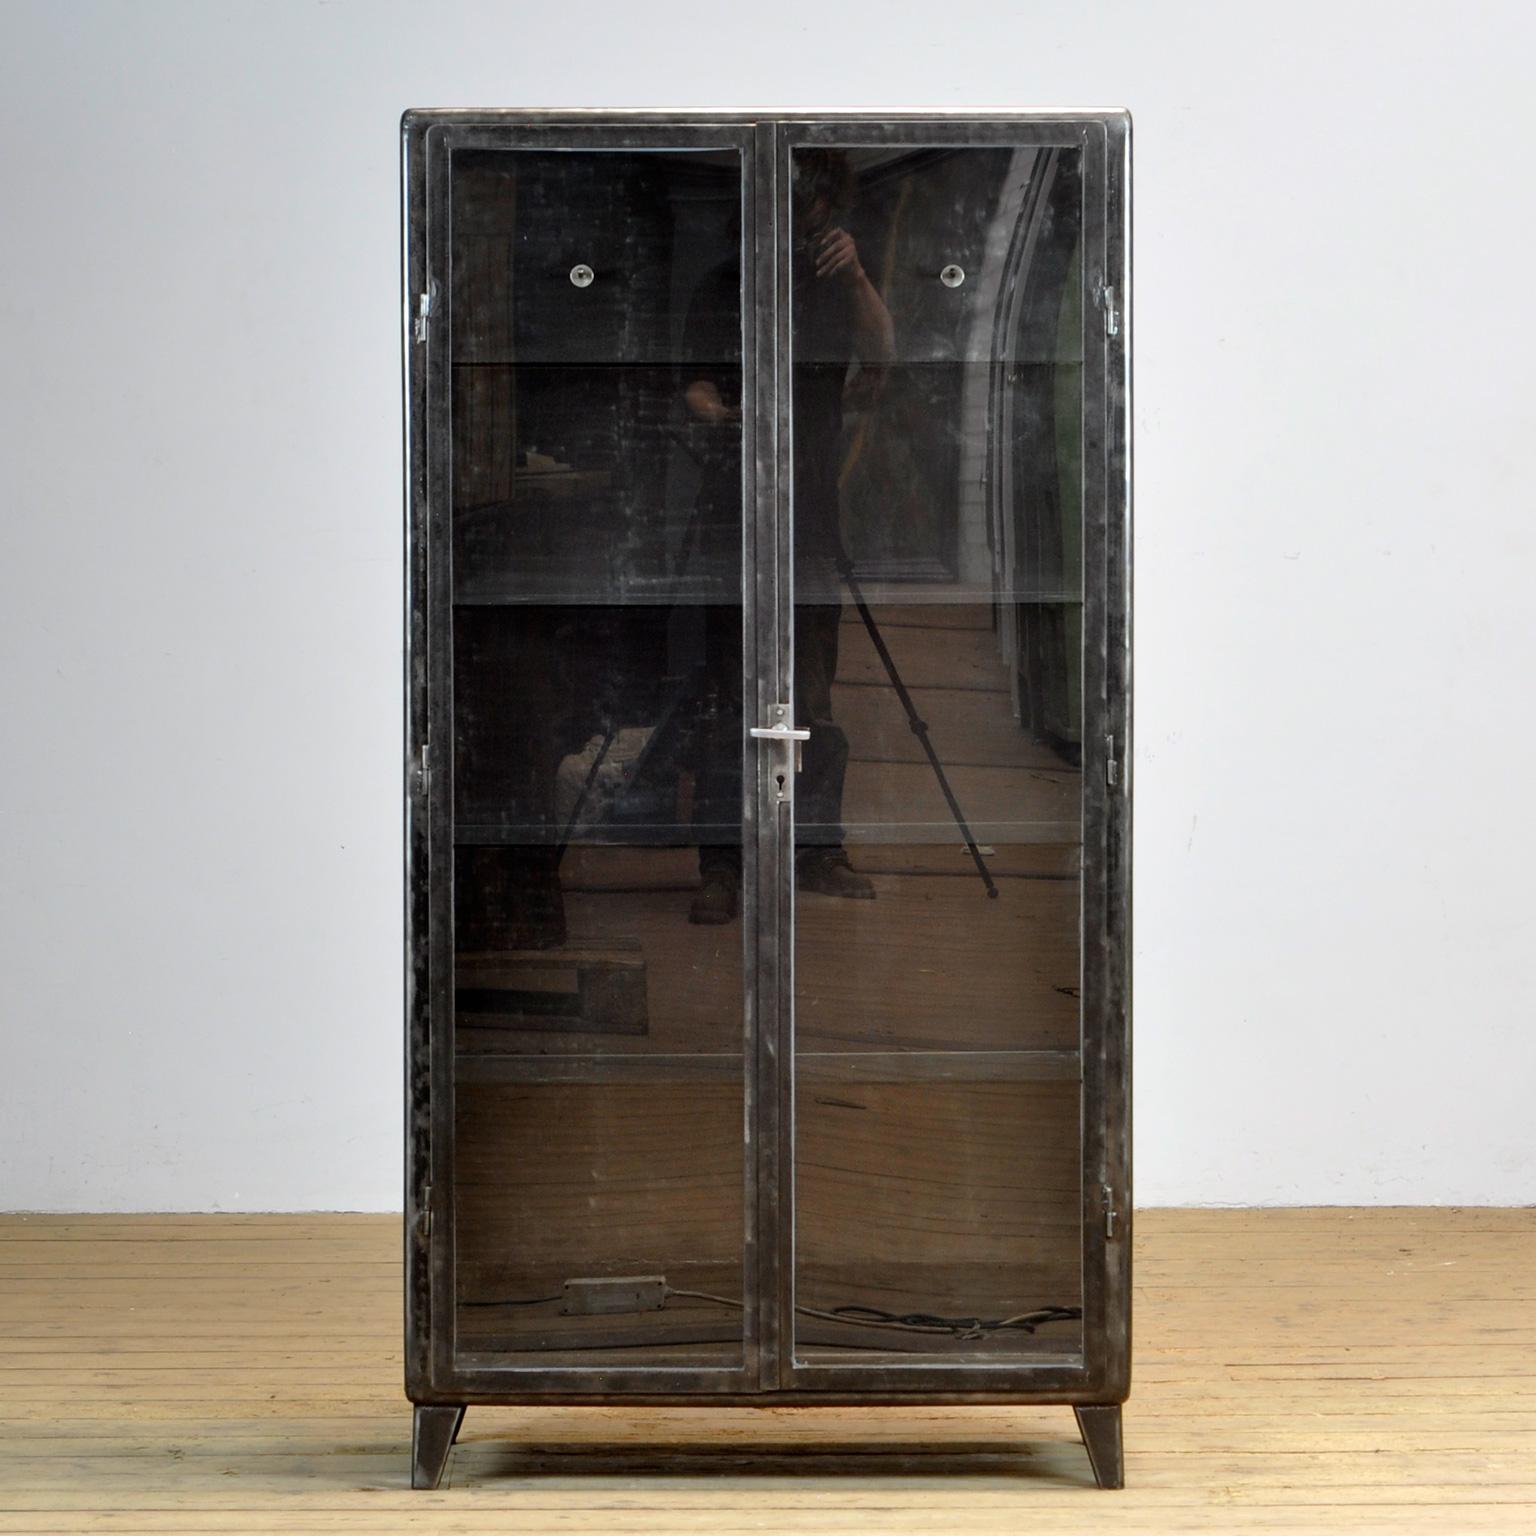 Polish medical cabinet, produced in the 1960’s. Made of iron and glass. Elegant design with rounded corners. On the inside three clothes hooks and 4 glass shelves. The cabinet has been stripped to the metal and finished with a transparent lacquer.